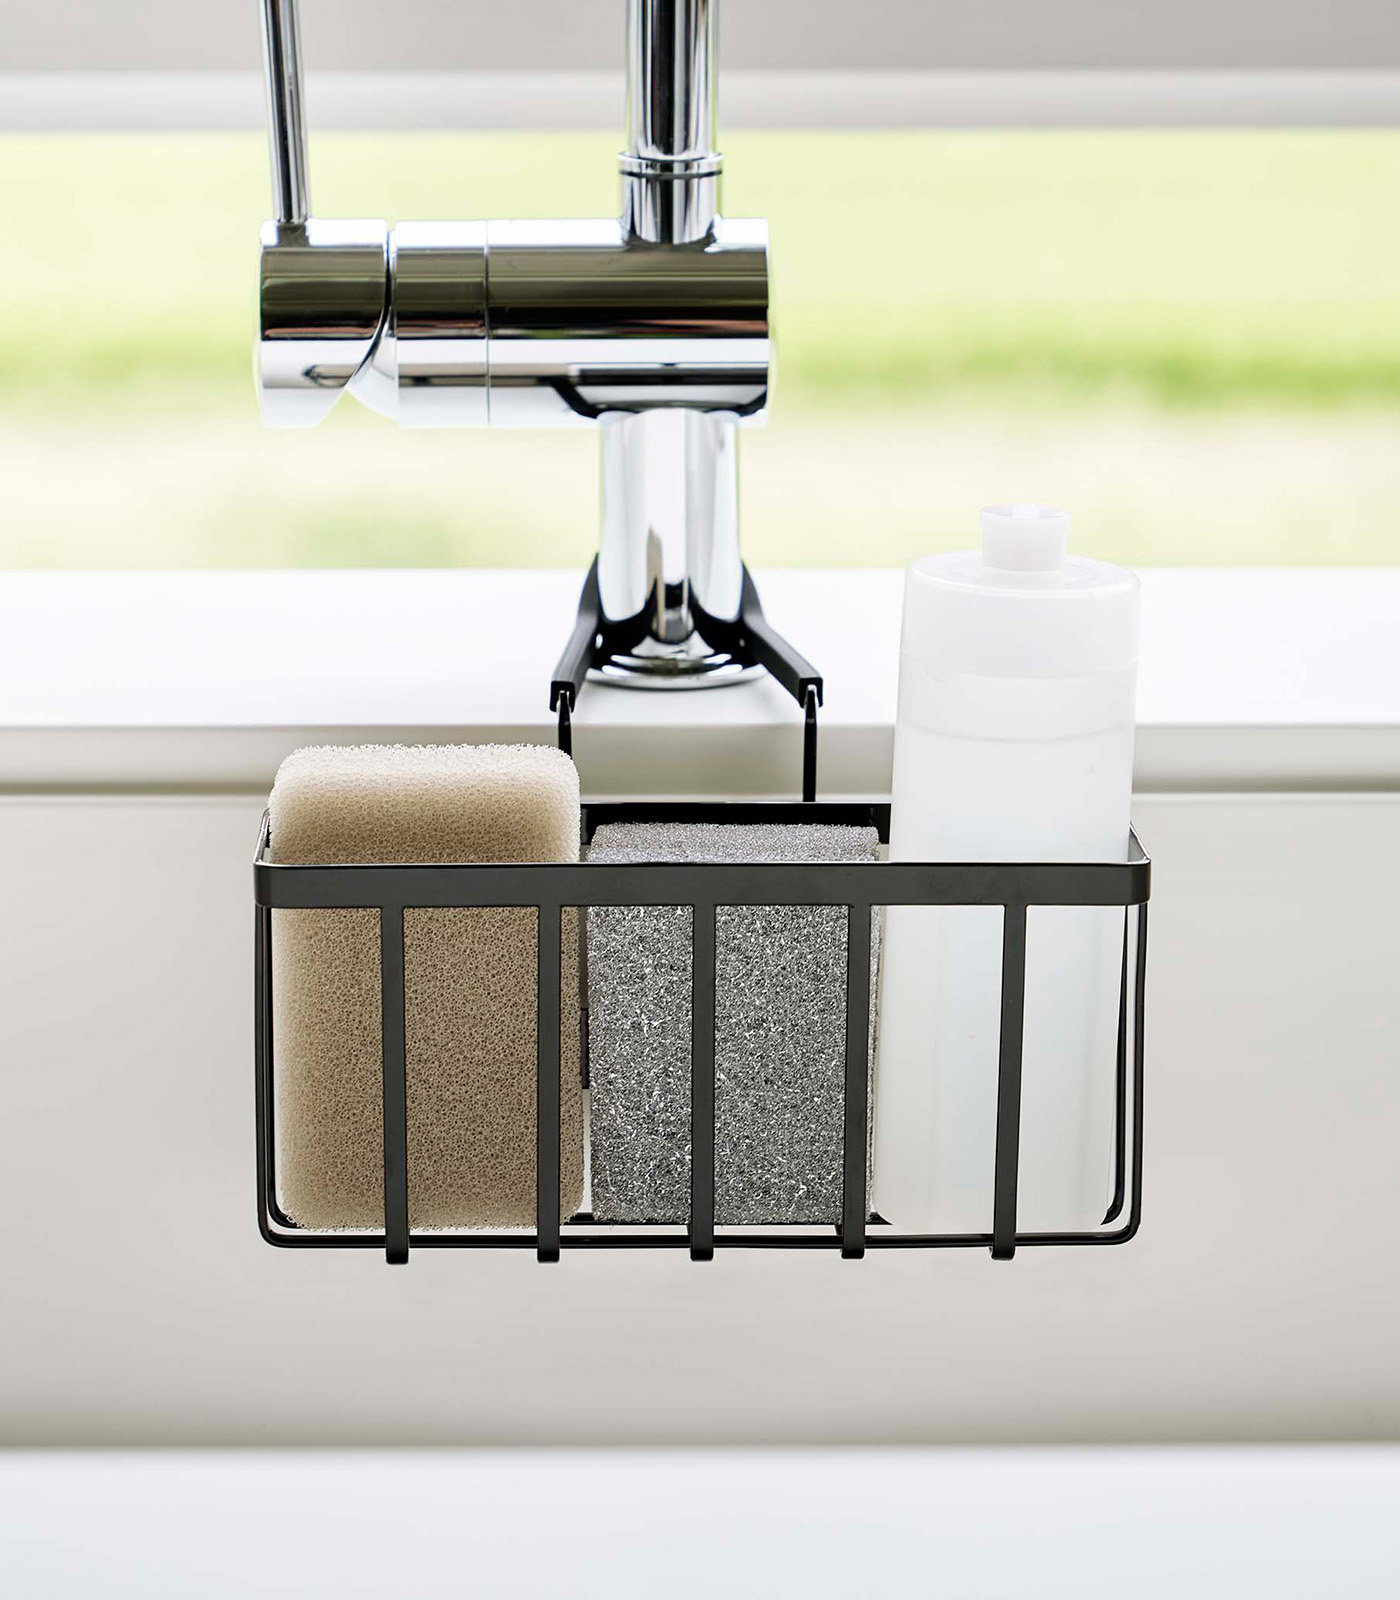  Home Basics Over Sink Shelf, (Chrome) Steel Over The Kitchen Sink  Organizer for Soap, Sponges, Scrubbers, and More